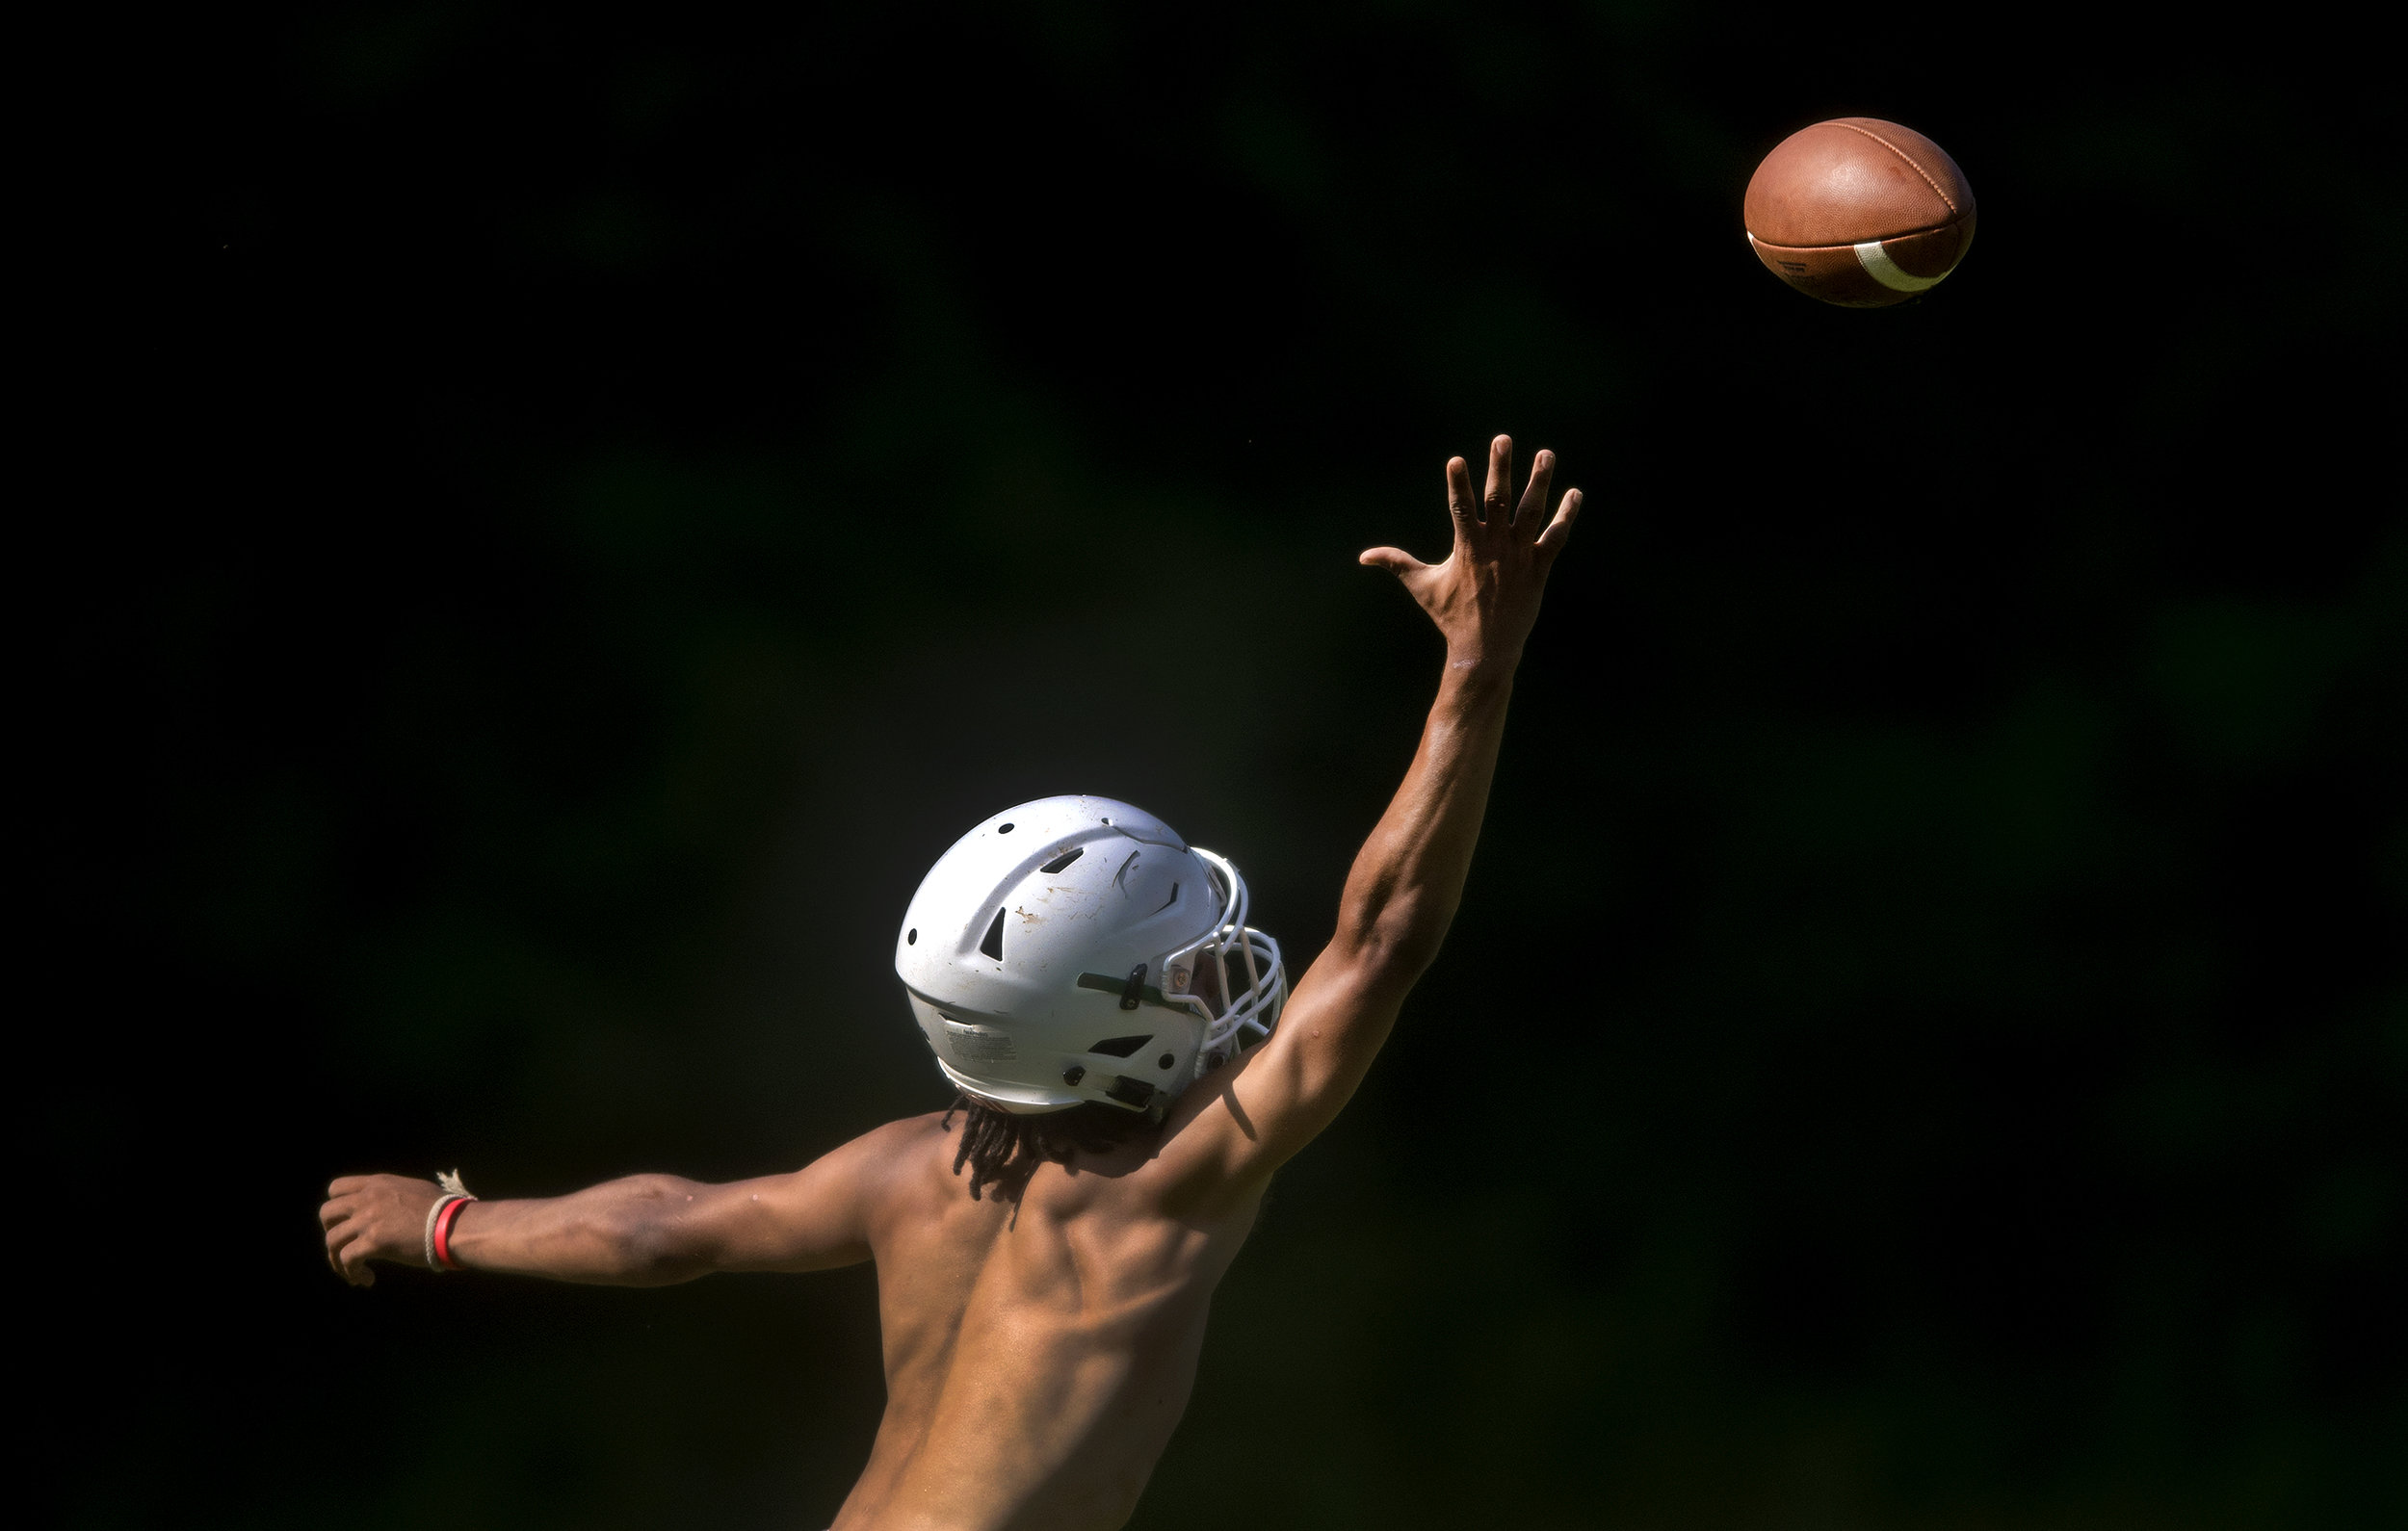  Riverside’s LeMarcus Cleckley reaches to catch the ball during a summer practice on Wednesday, July 11, 2018, at Riverside High School. 